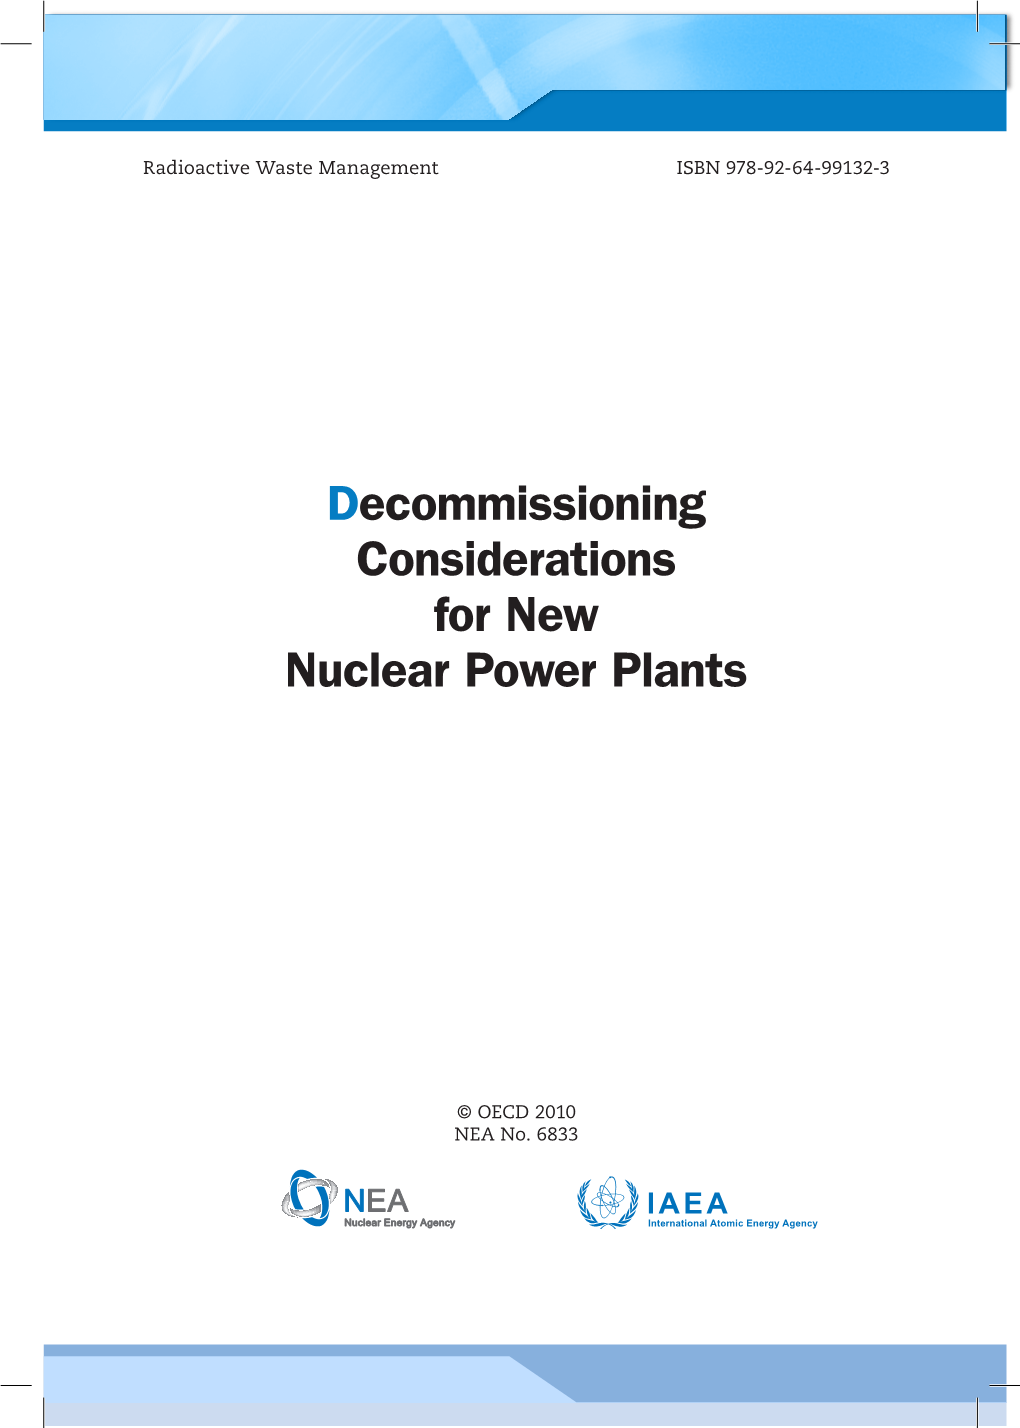 Decommissioning Considerations for New Nuclear Power Plants